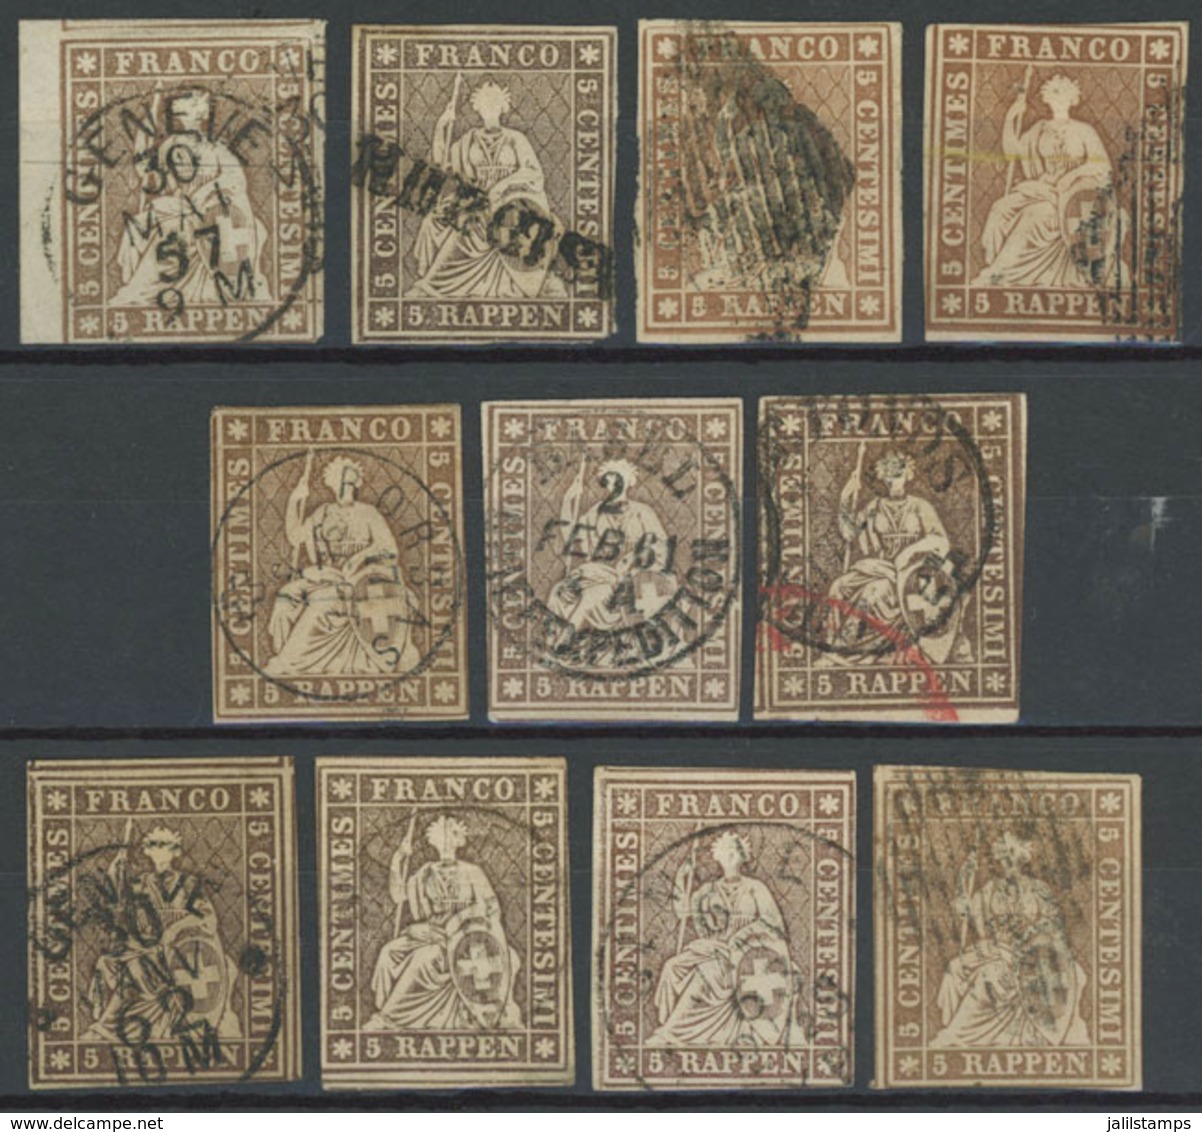 SWITZERLAND: Sc.14 + Similar Values, 1854/1862 5Rp., Stockcard With 11 Used Examples, Most Of Fine Quality. There Is An  - Lotes/Colecciones